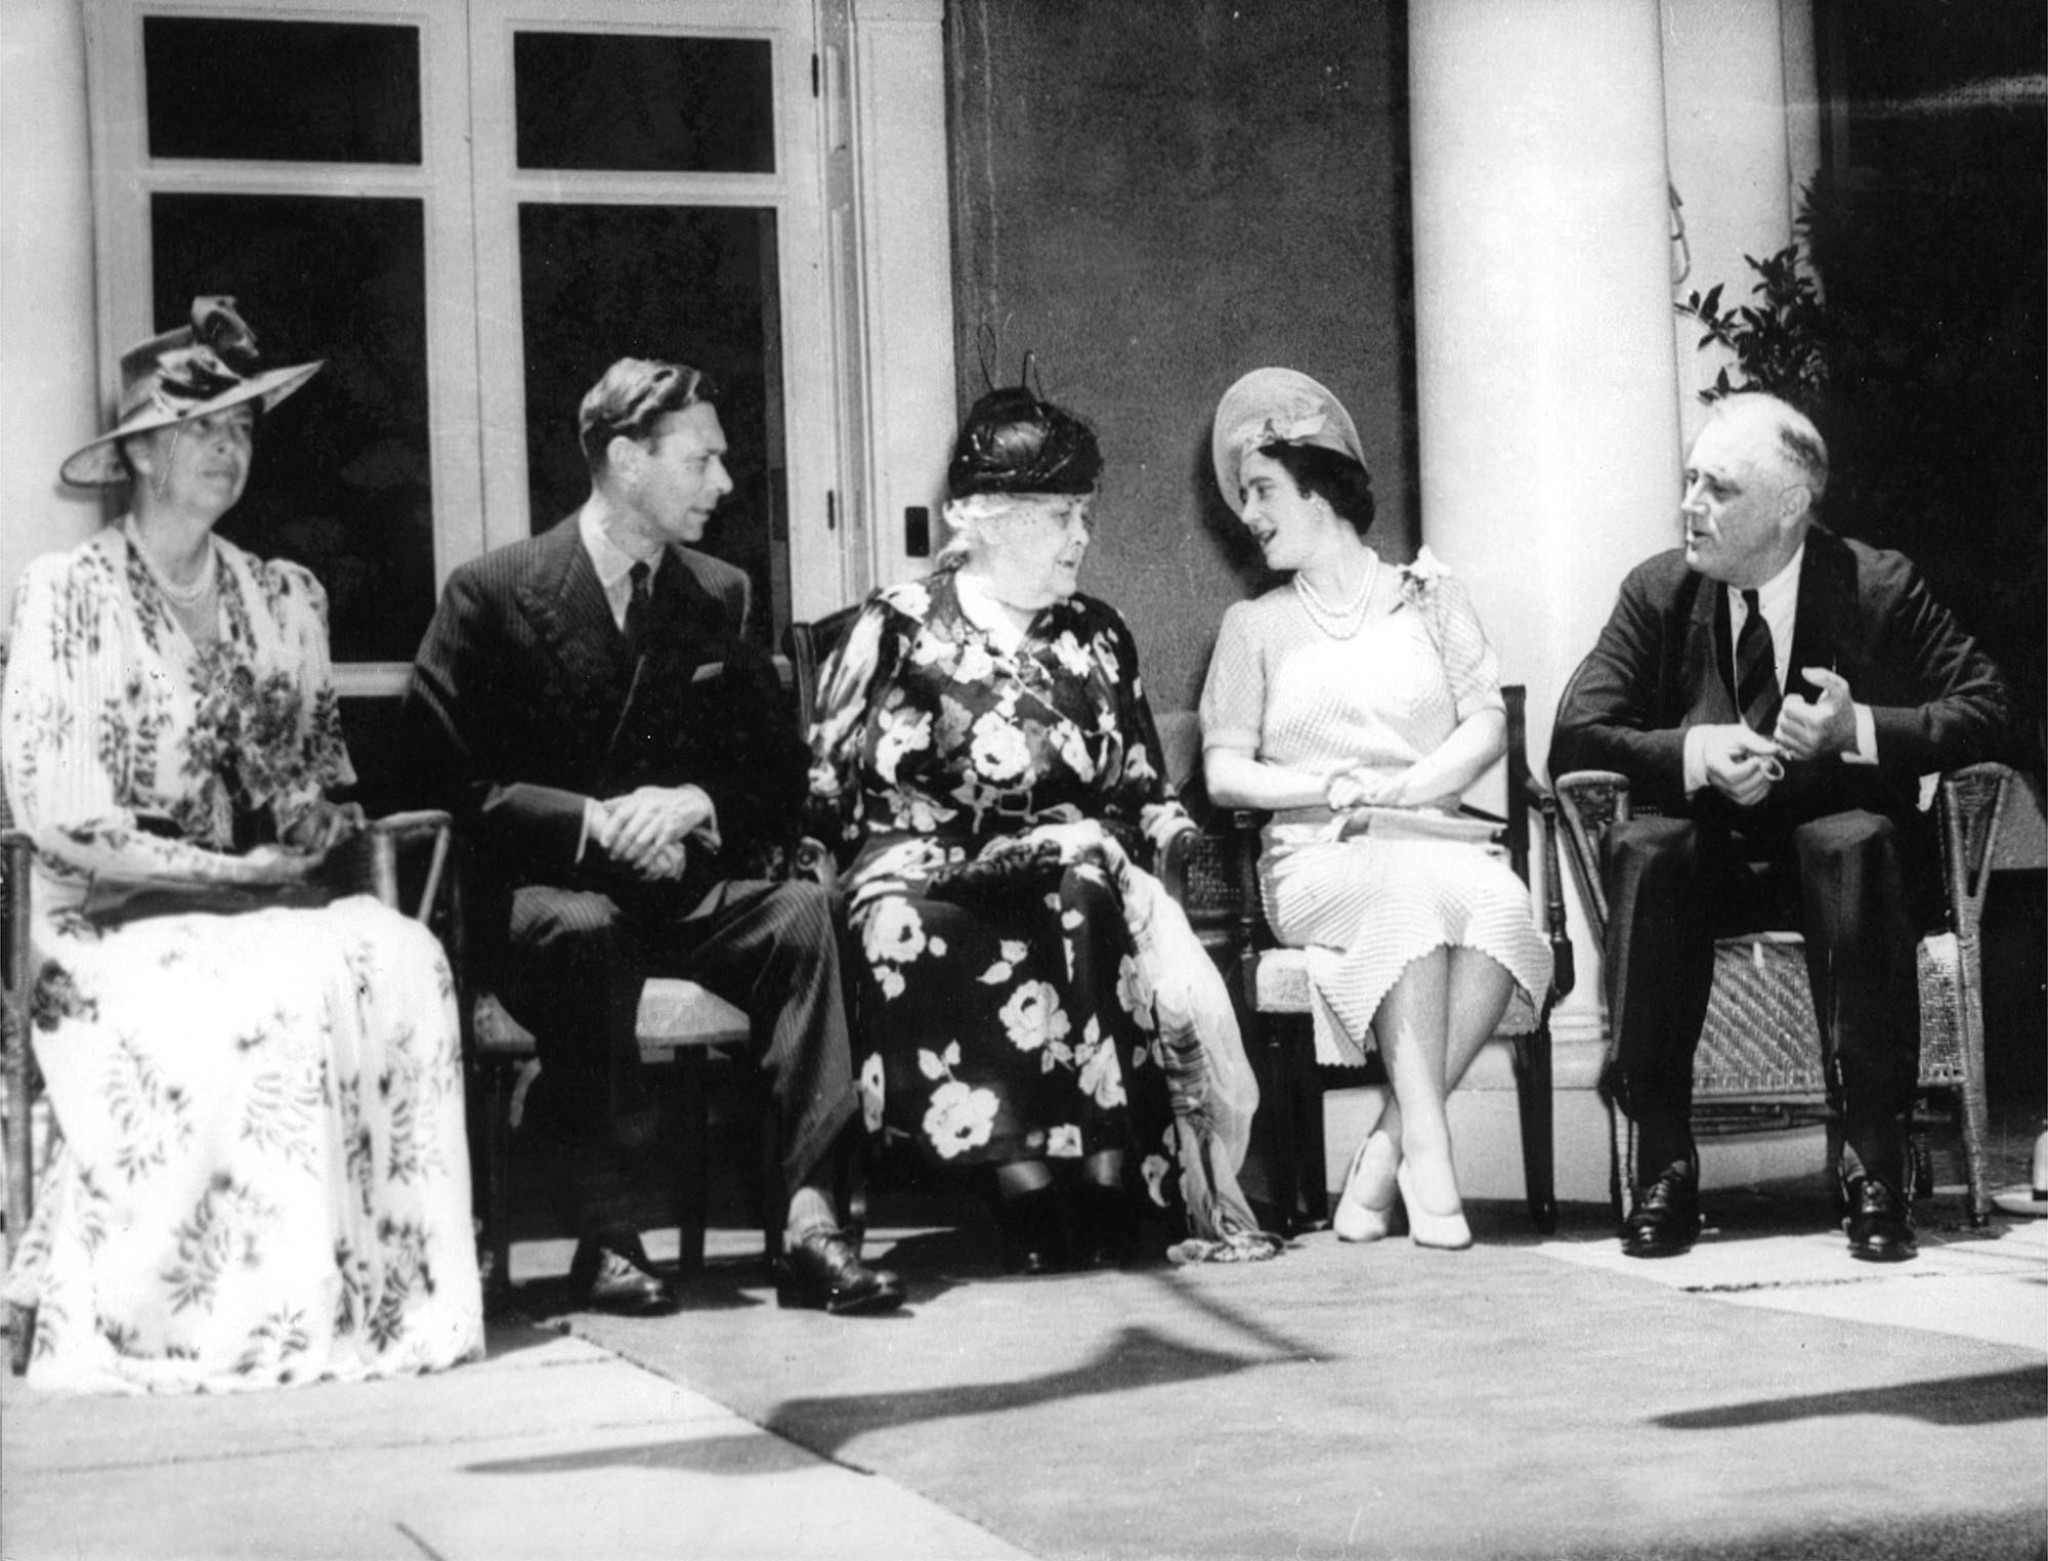 The Roosevelts and The Royals enjoying the porch.